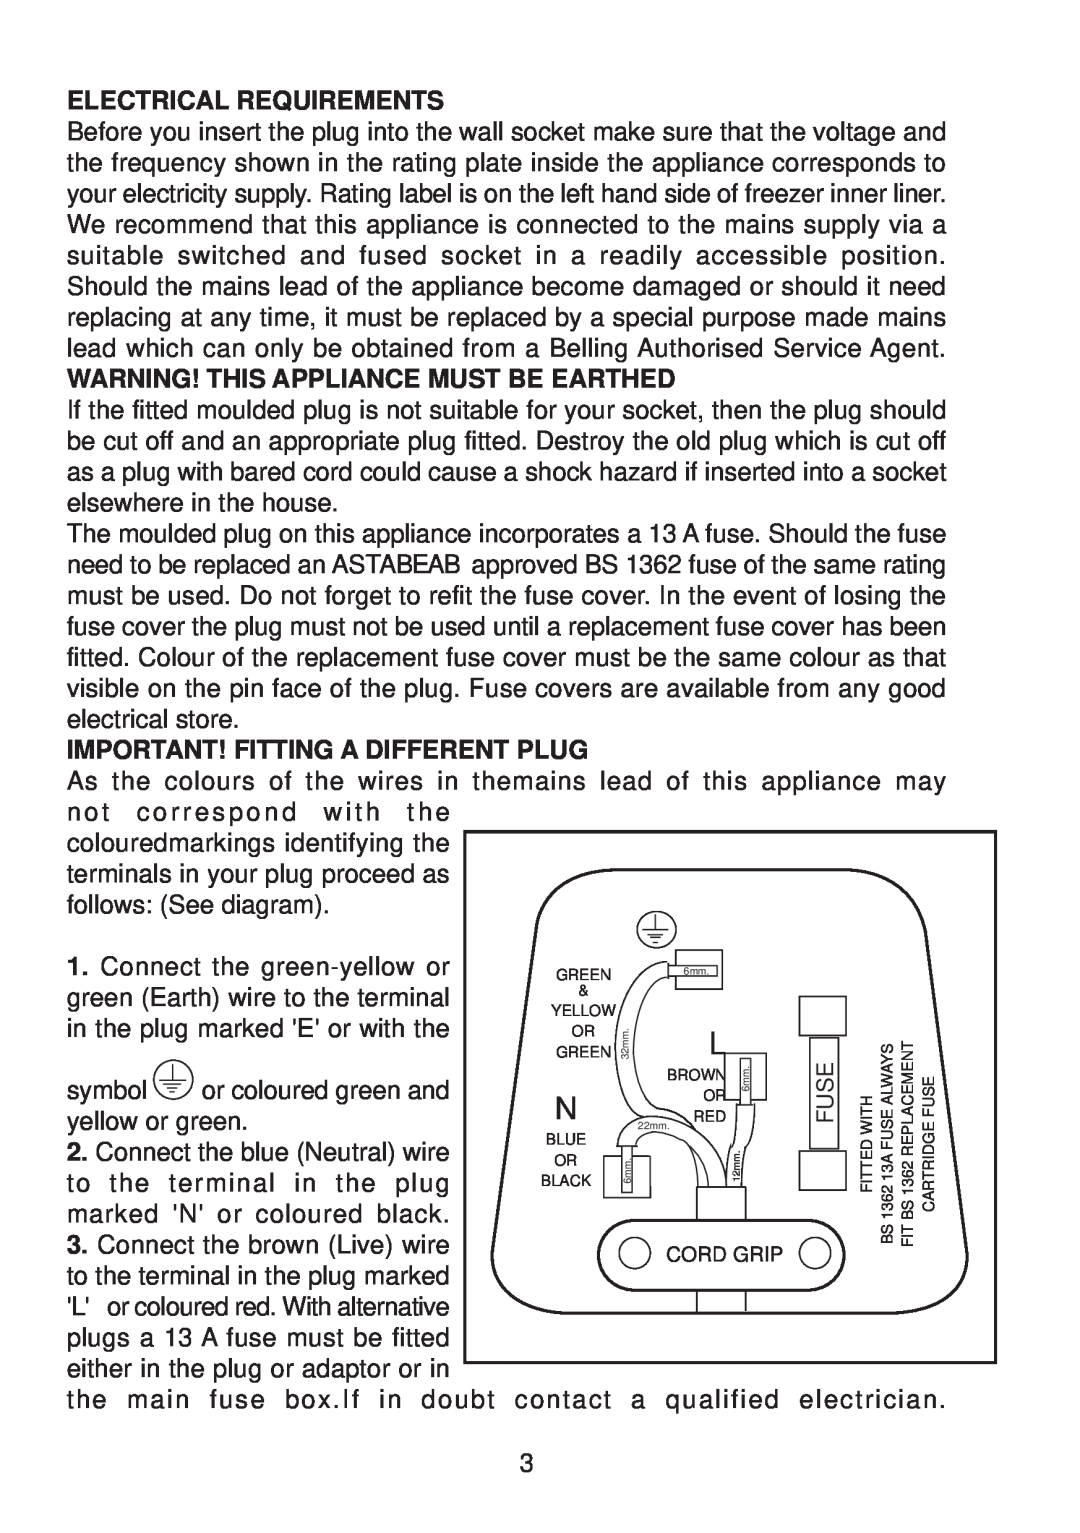 Glen Dimplex Home Appliances Ltd IFF5050 manual Electrical Requirements, Warning! This Appliance Must Be Earthed 